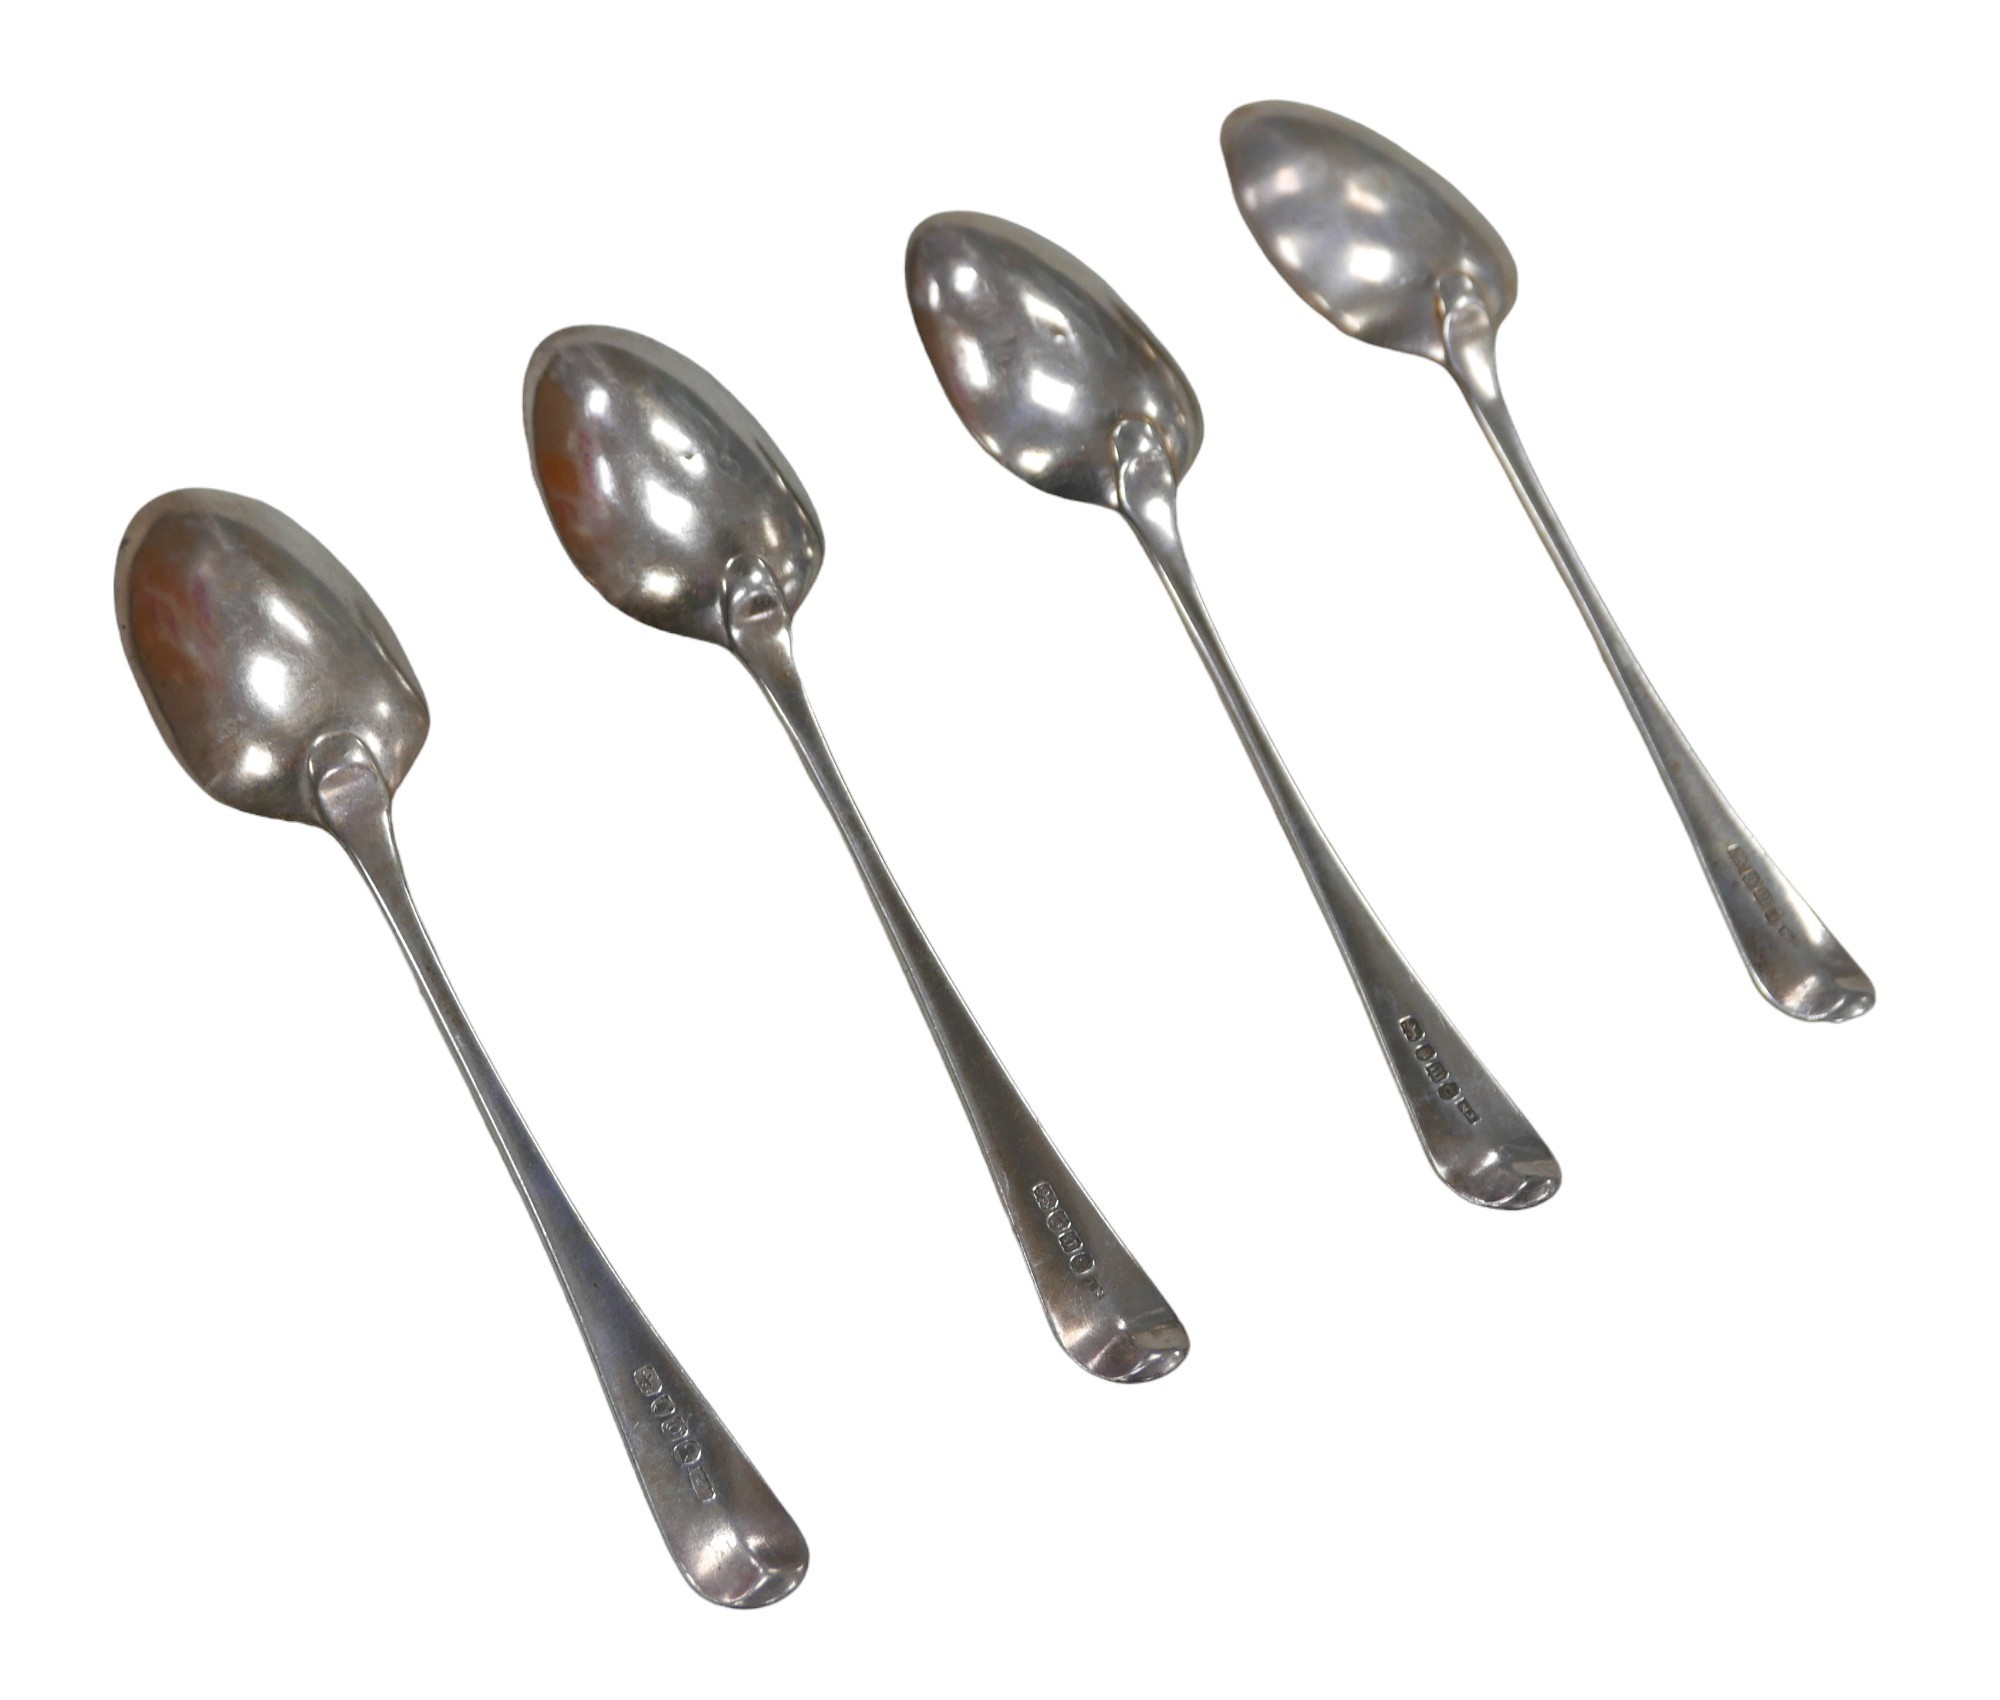 Four George III silver old English pattern table spoons, each engraved with the initial 'M' to - Image 2 of 6